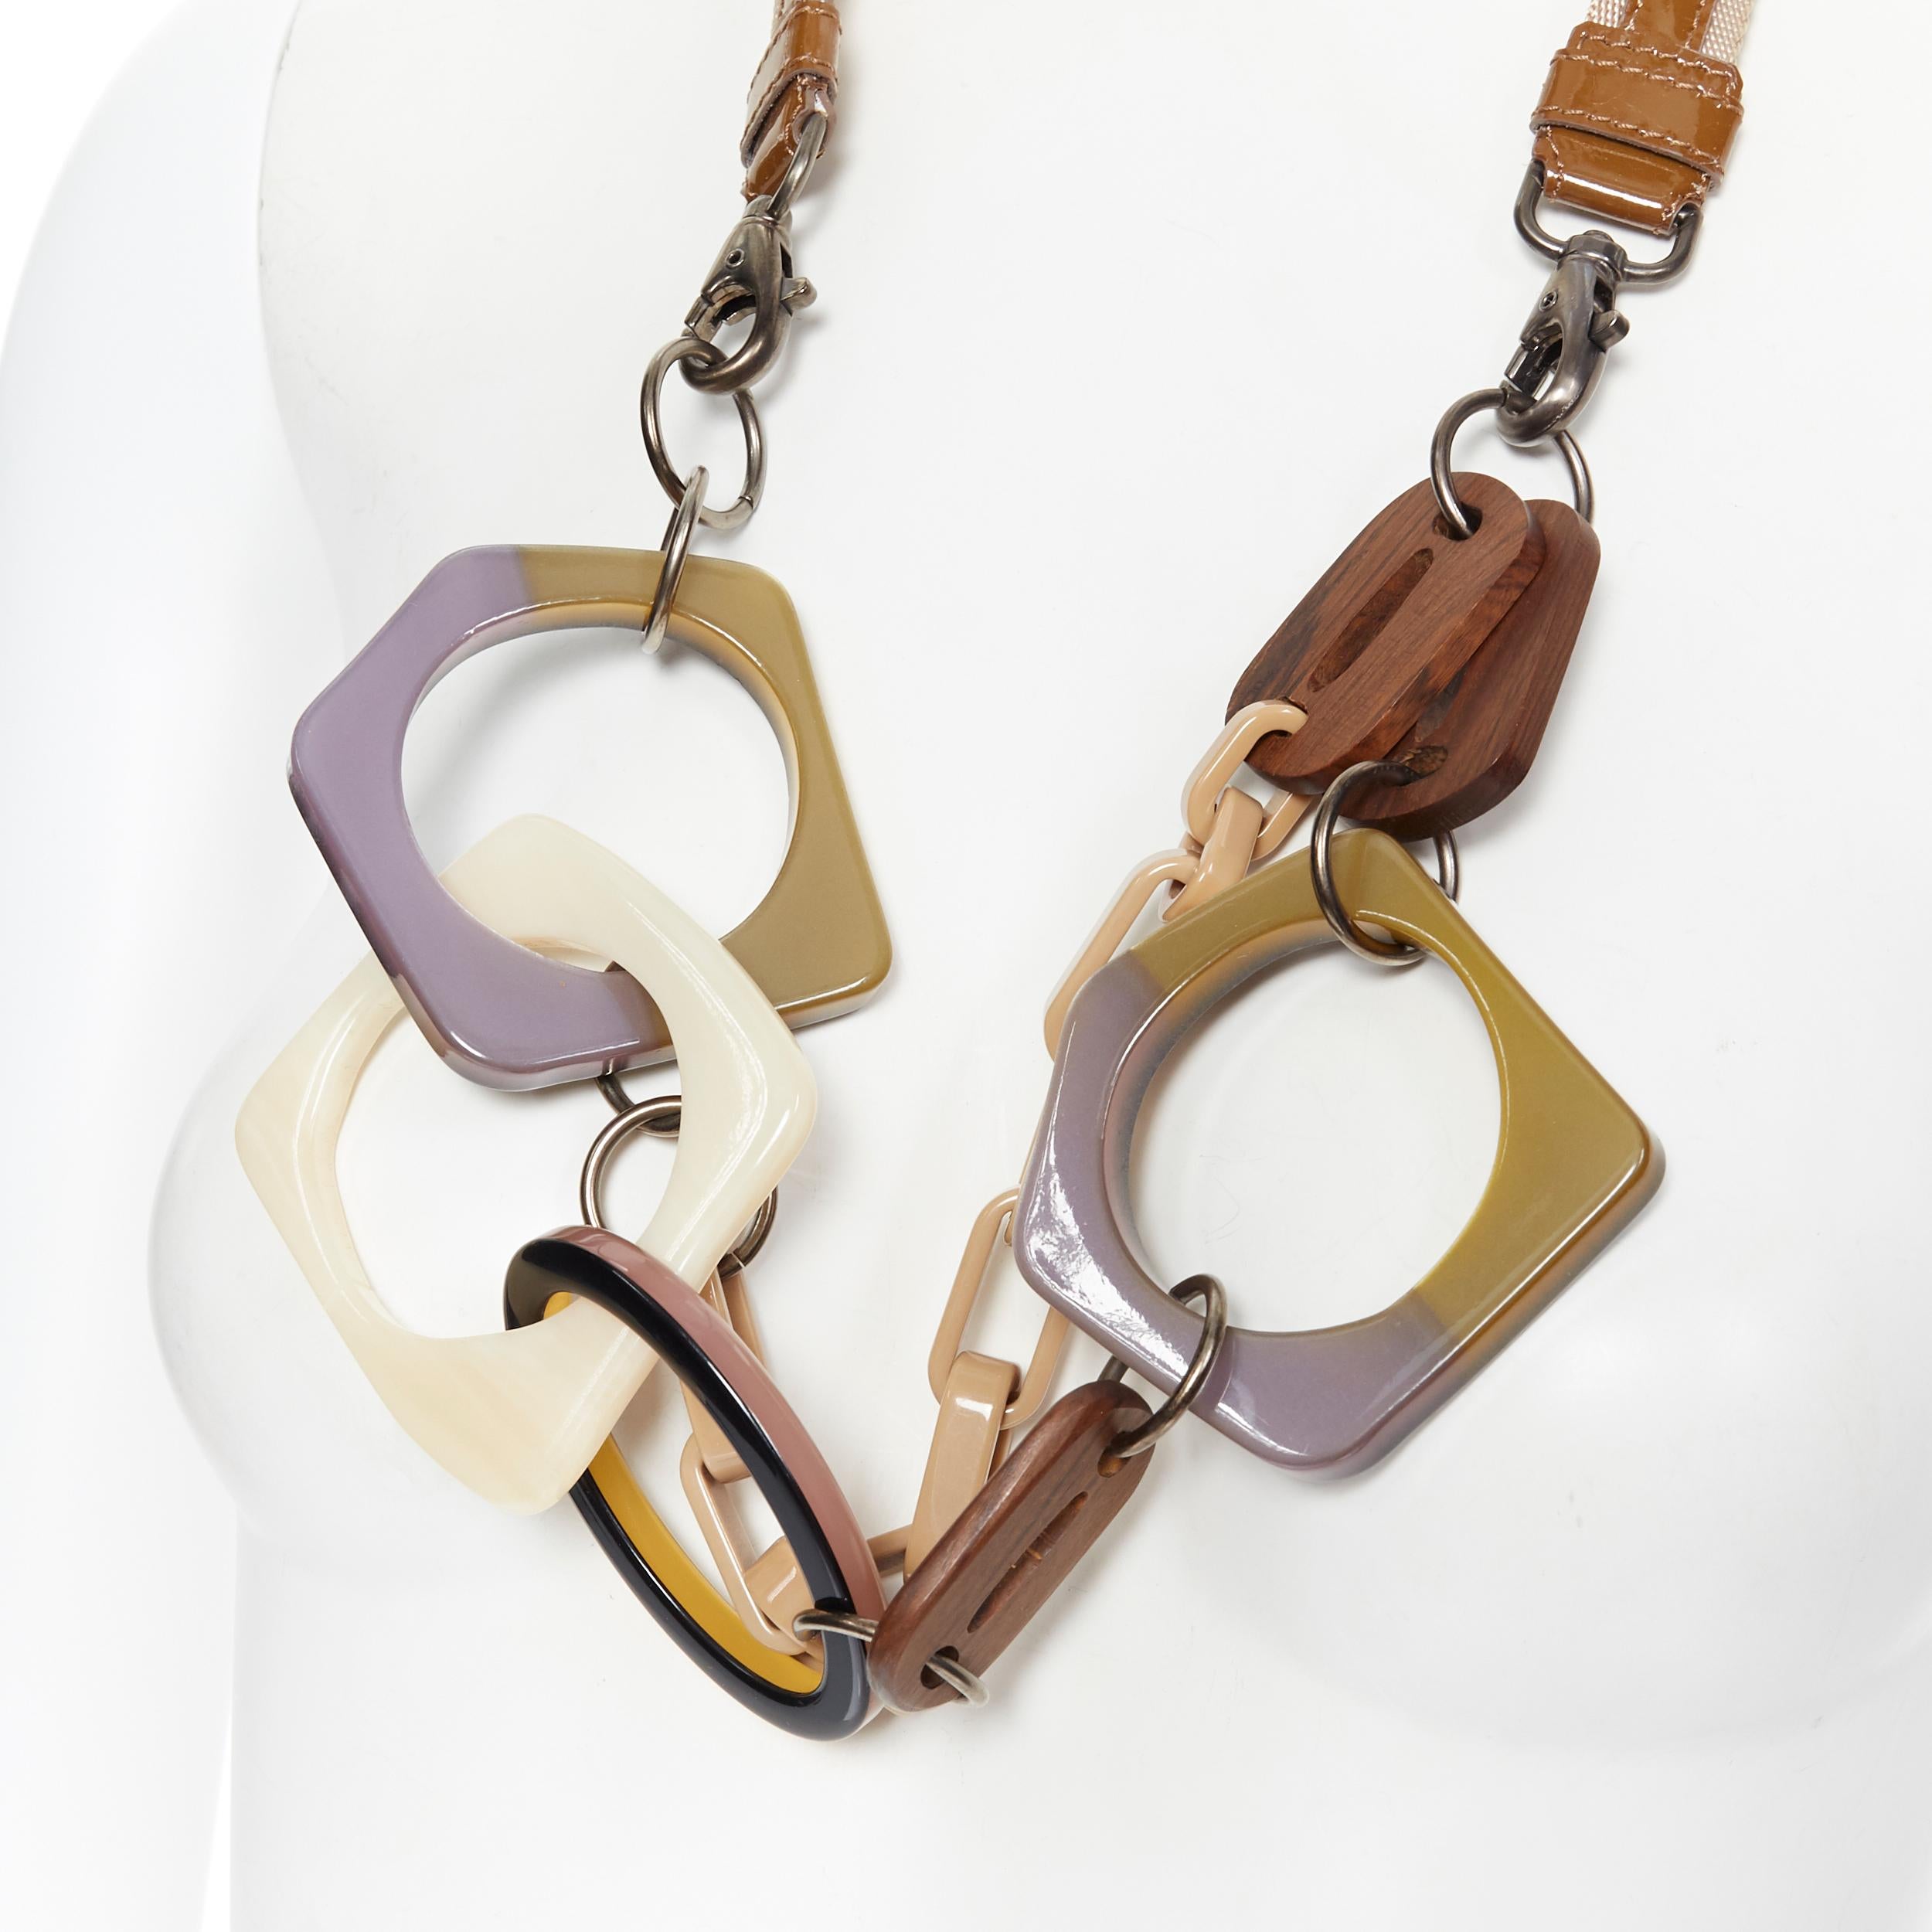 MARNI tribal resin looped bangle wooden loop patent strap statement necklace
Brand: Marni
Designer: Marni
Model Name / Style: Statement necklace
Material: Resin
Color: Multicolour
Pattern: Solid
Closure: Lobster 
Made in: Italy

CONDITION: